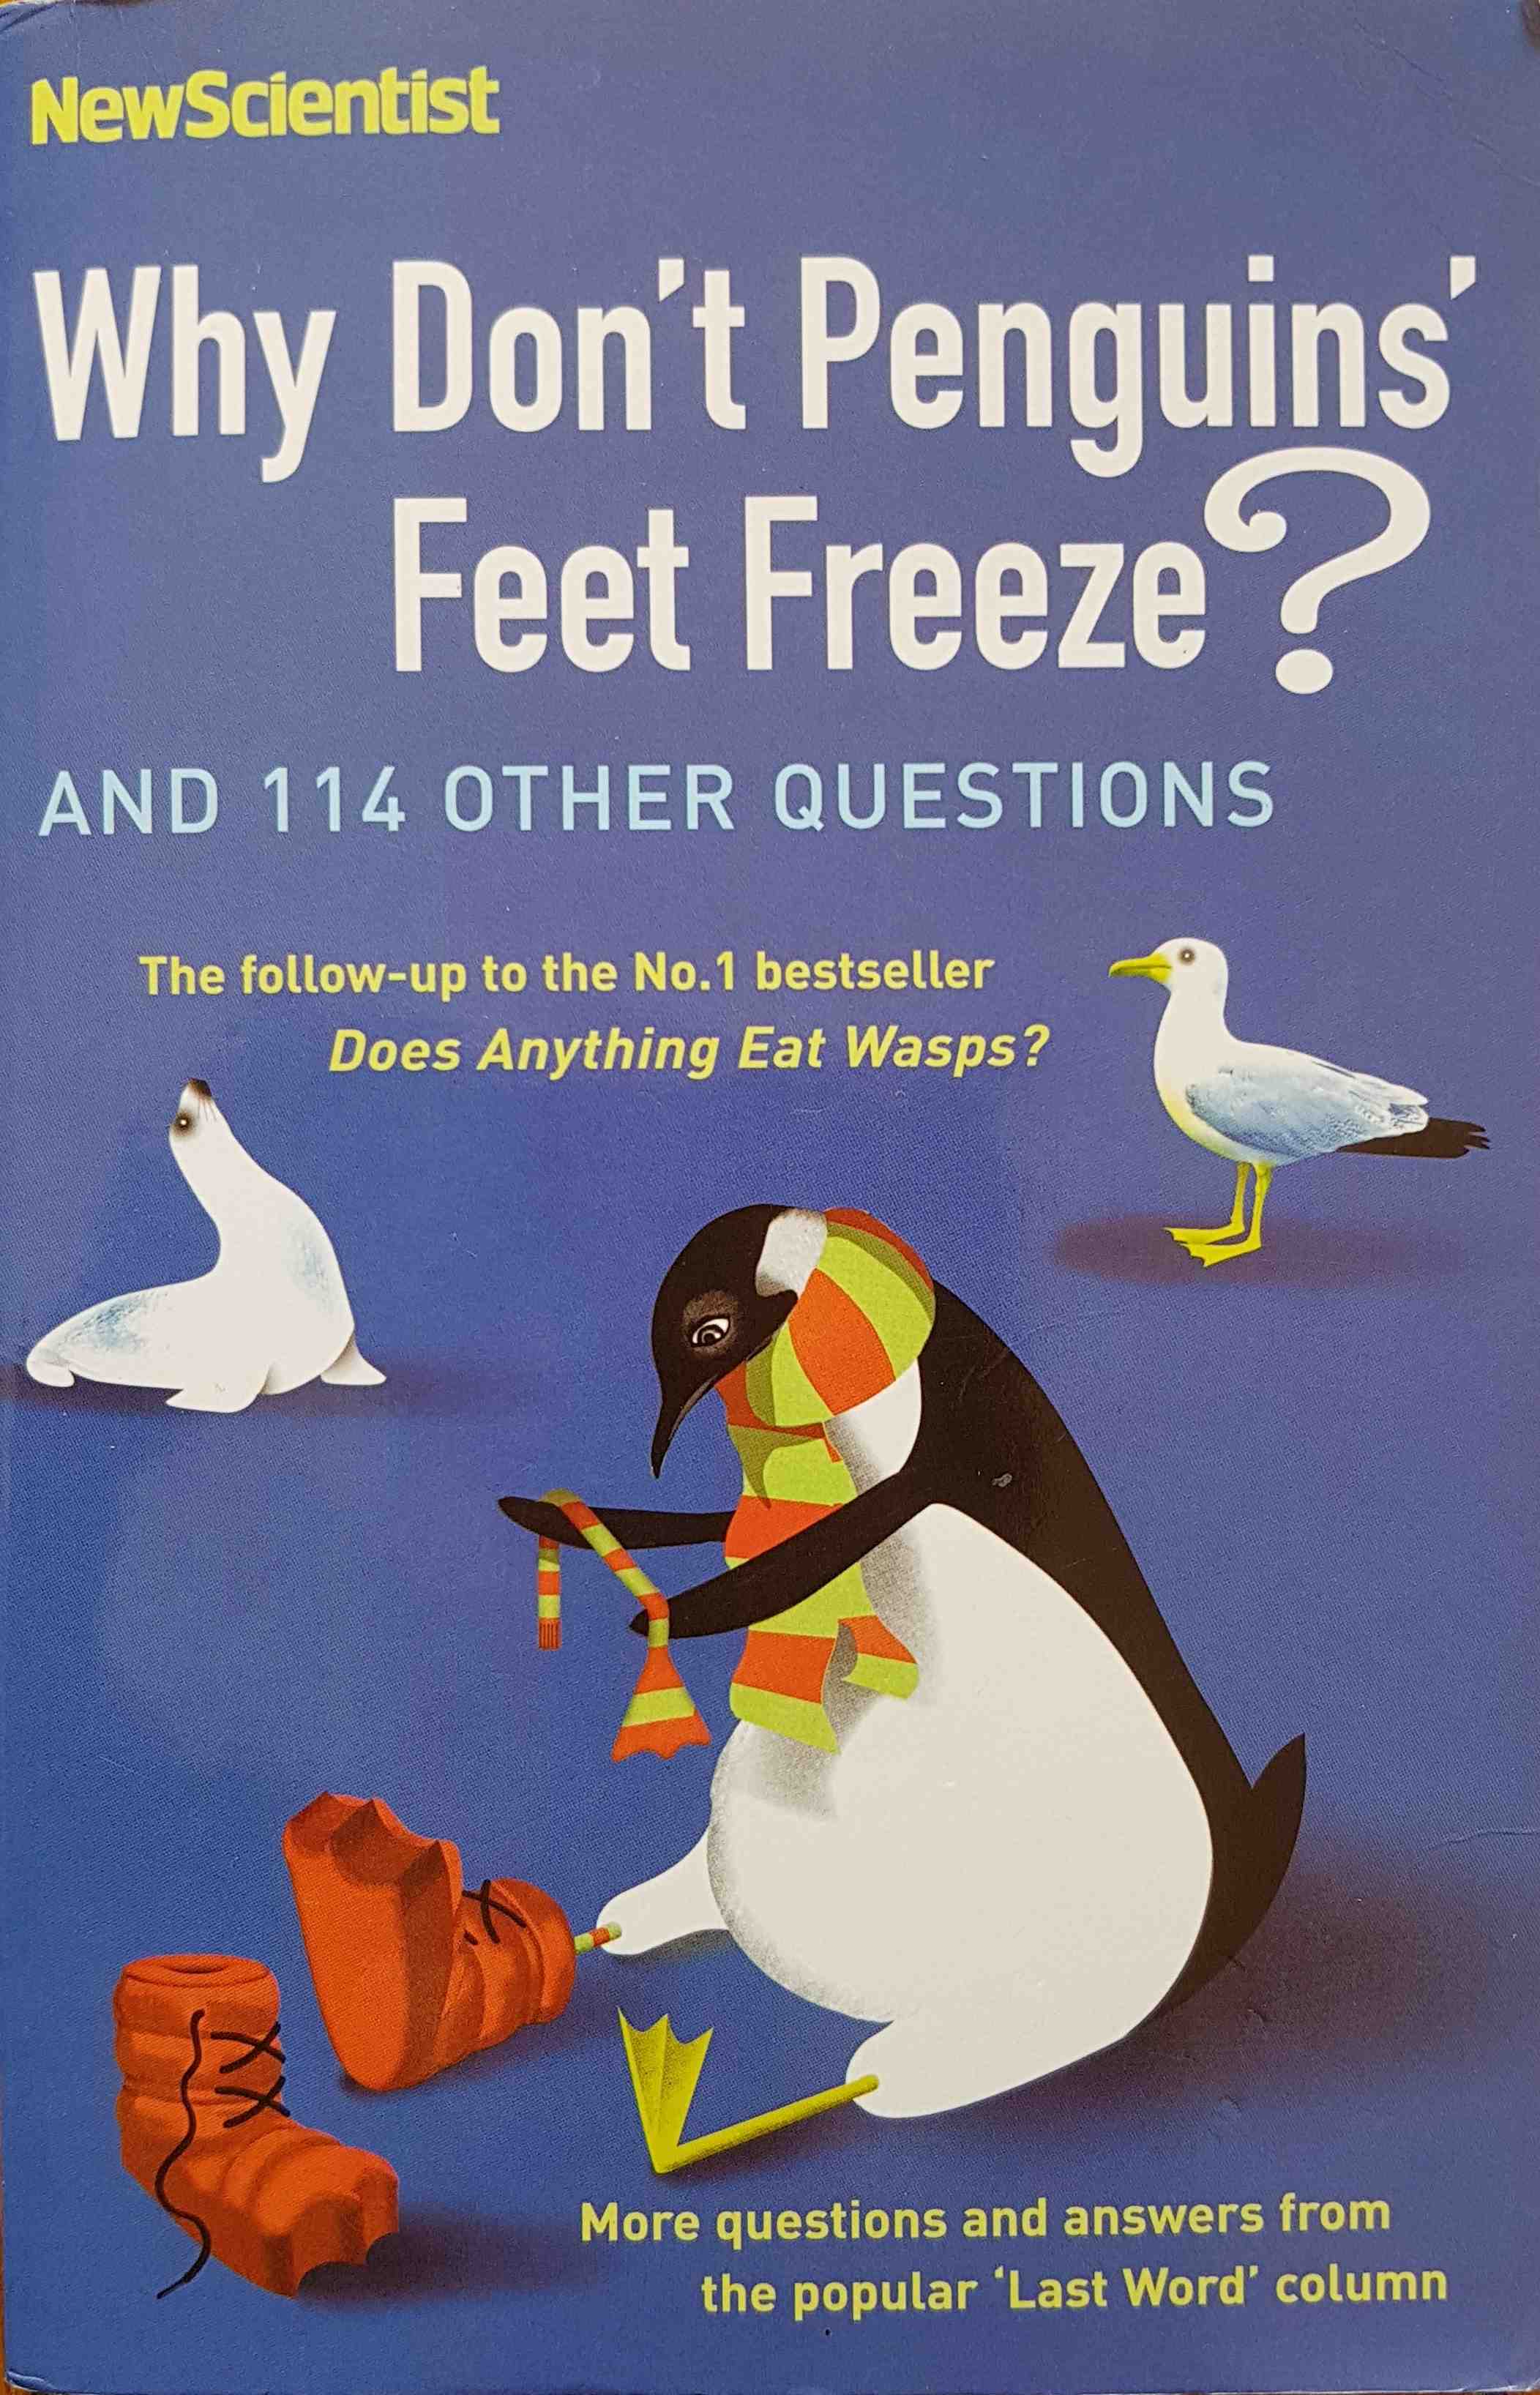 Picture of Why don't penguins' feet freeze? by artist Mick O'Hare from ITV, Channel 4 and Channel 5 books library